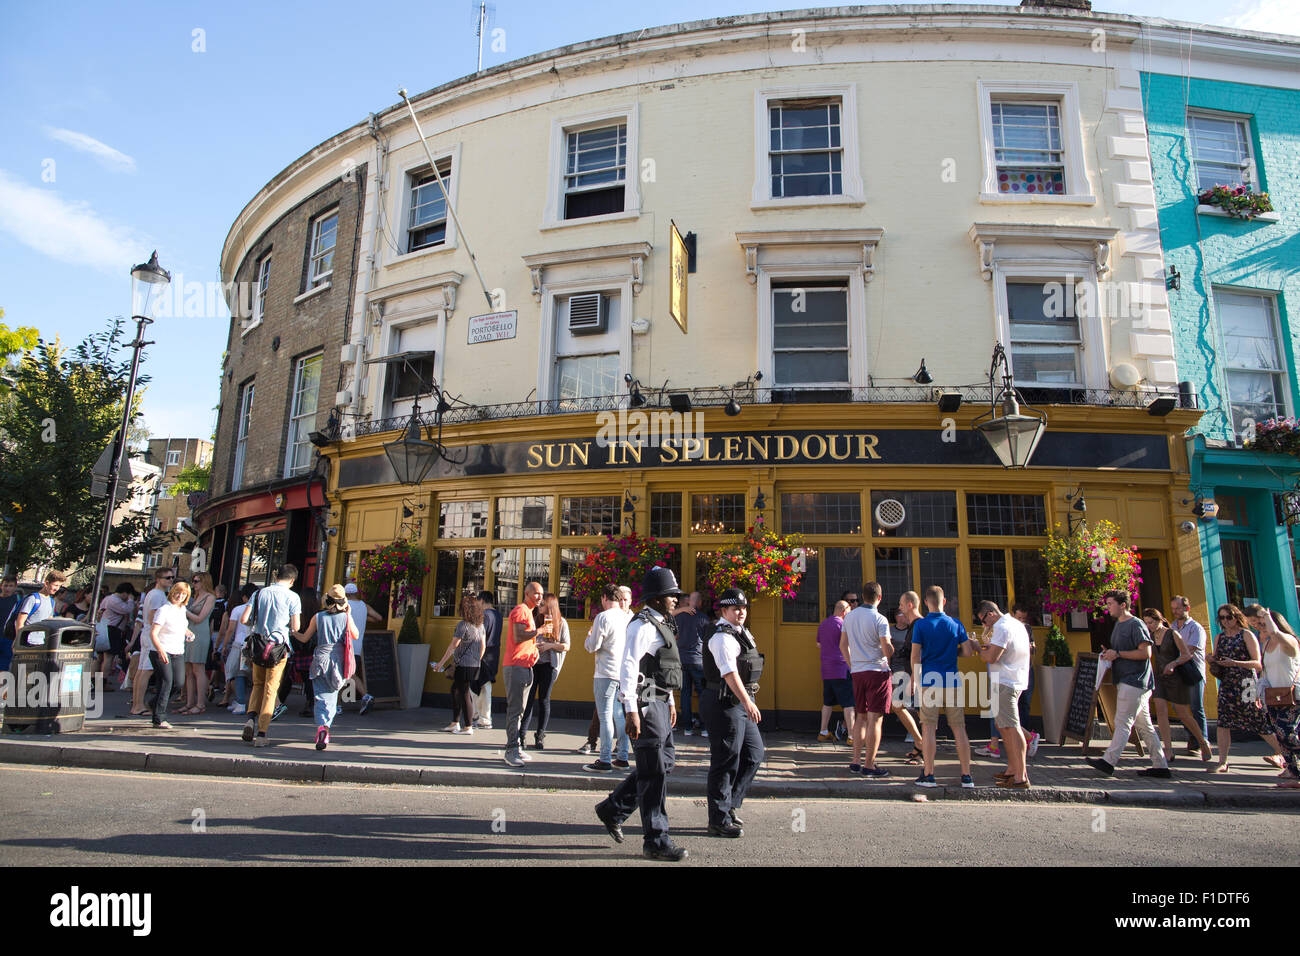 The Sun In Splendour pub, one of the oldest pubs in London, located on Portobello Road, Notting Hill, West London, England, UK Stock Photo